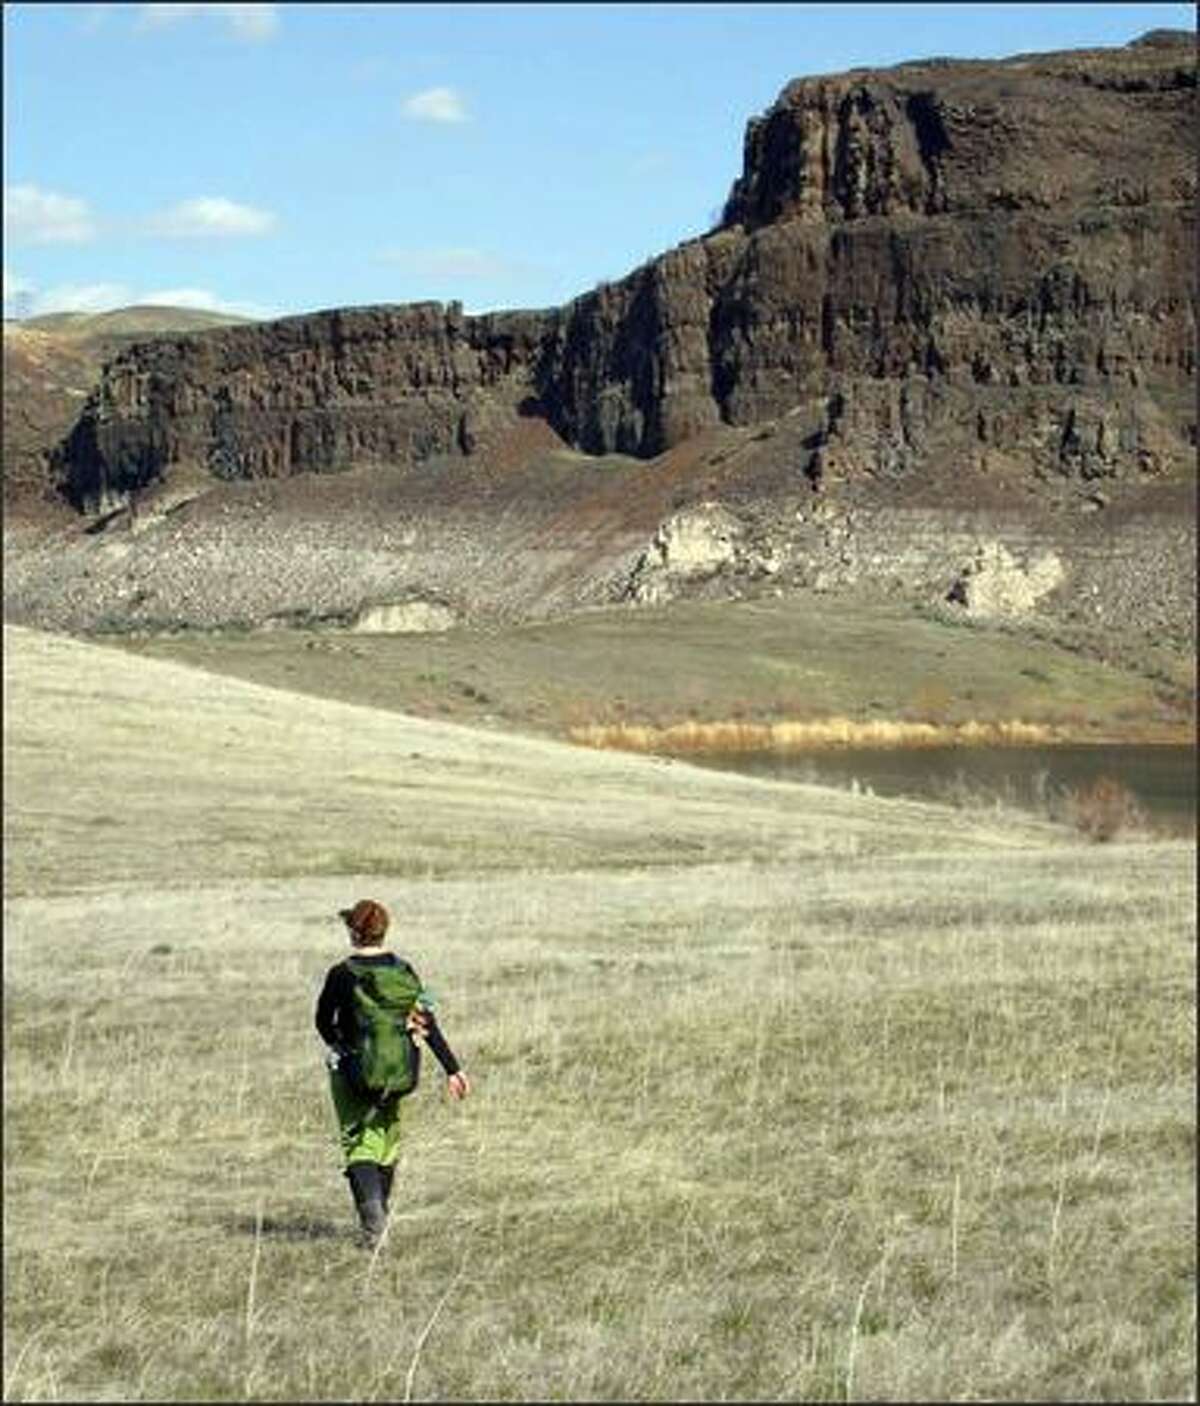 The open country near Ancient Lakes in Eastern Washington made for a perfect early spring escape from Seattle.